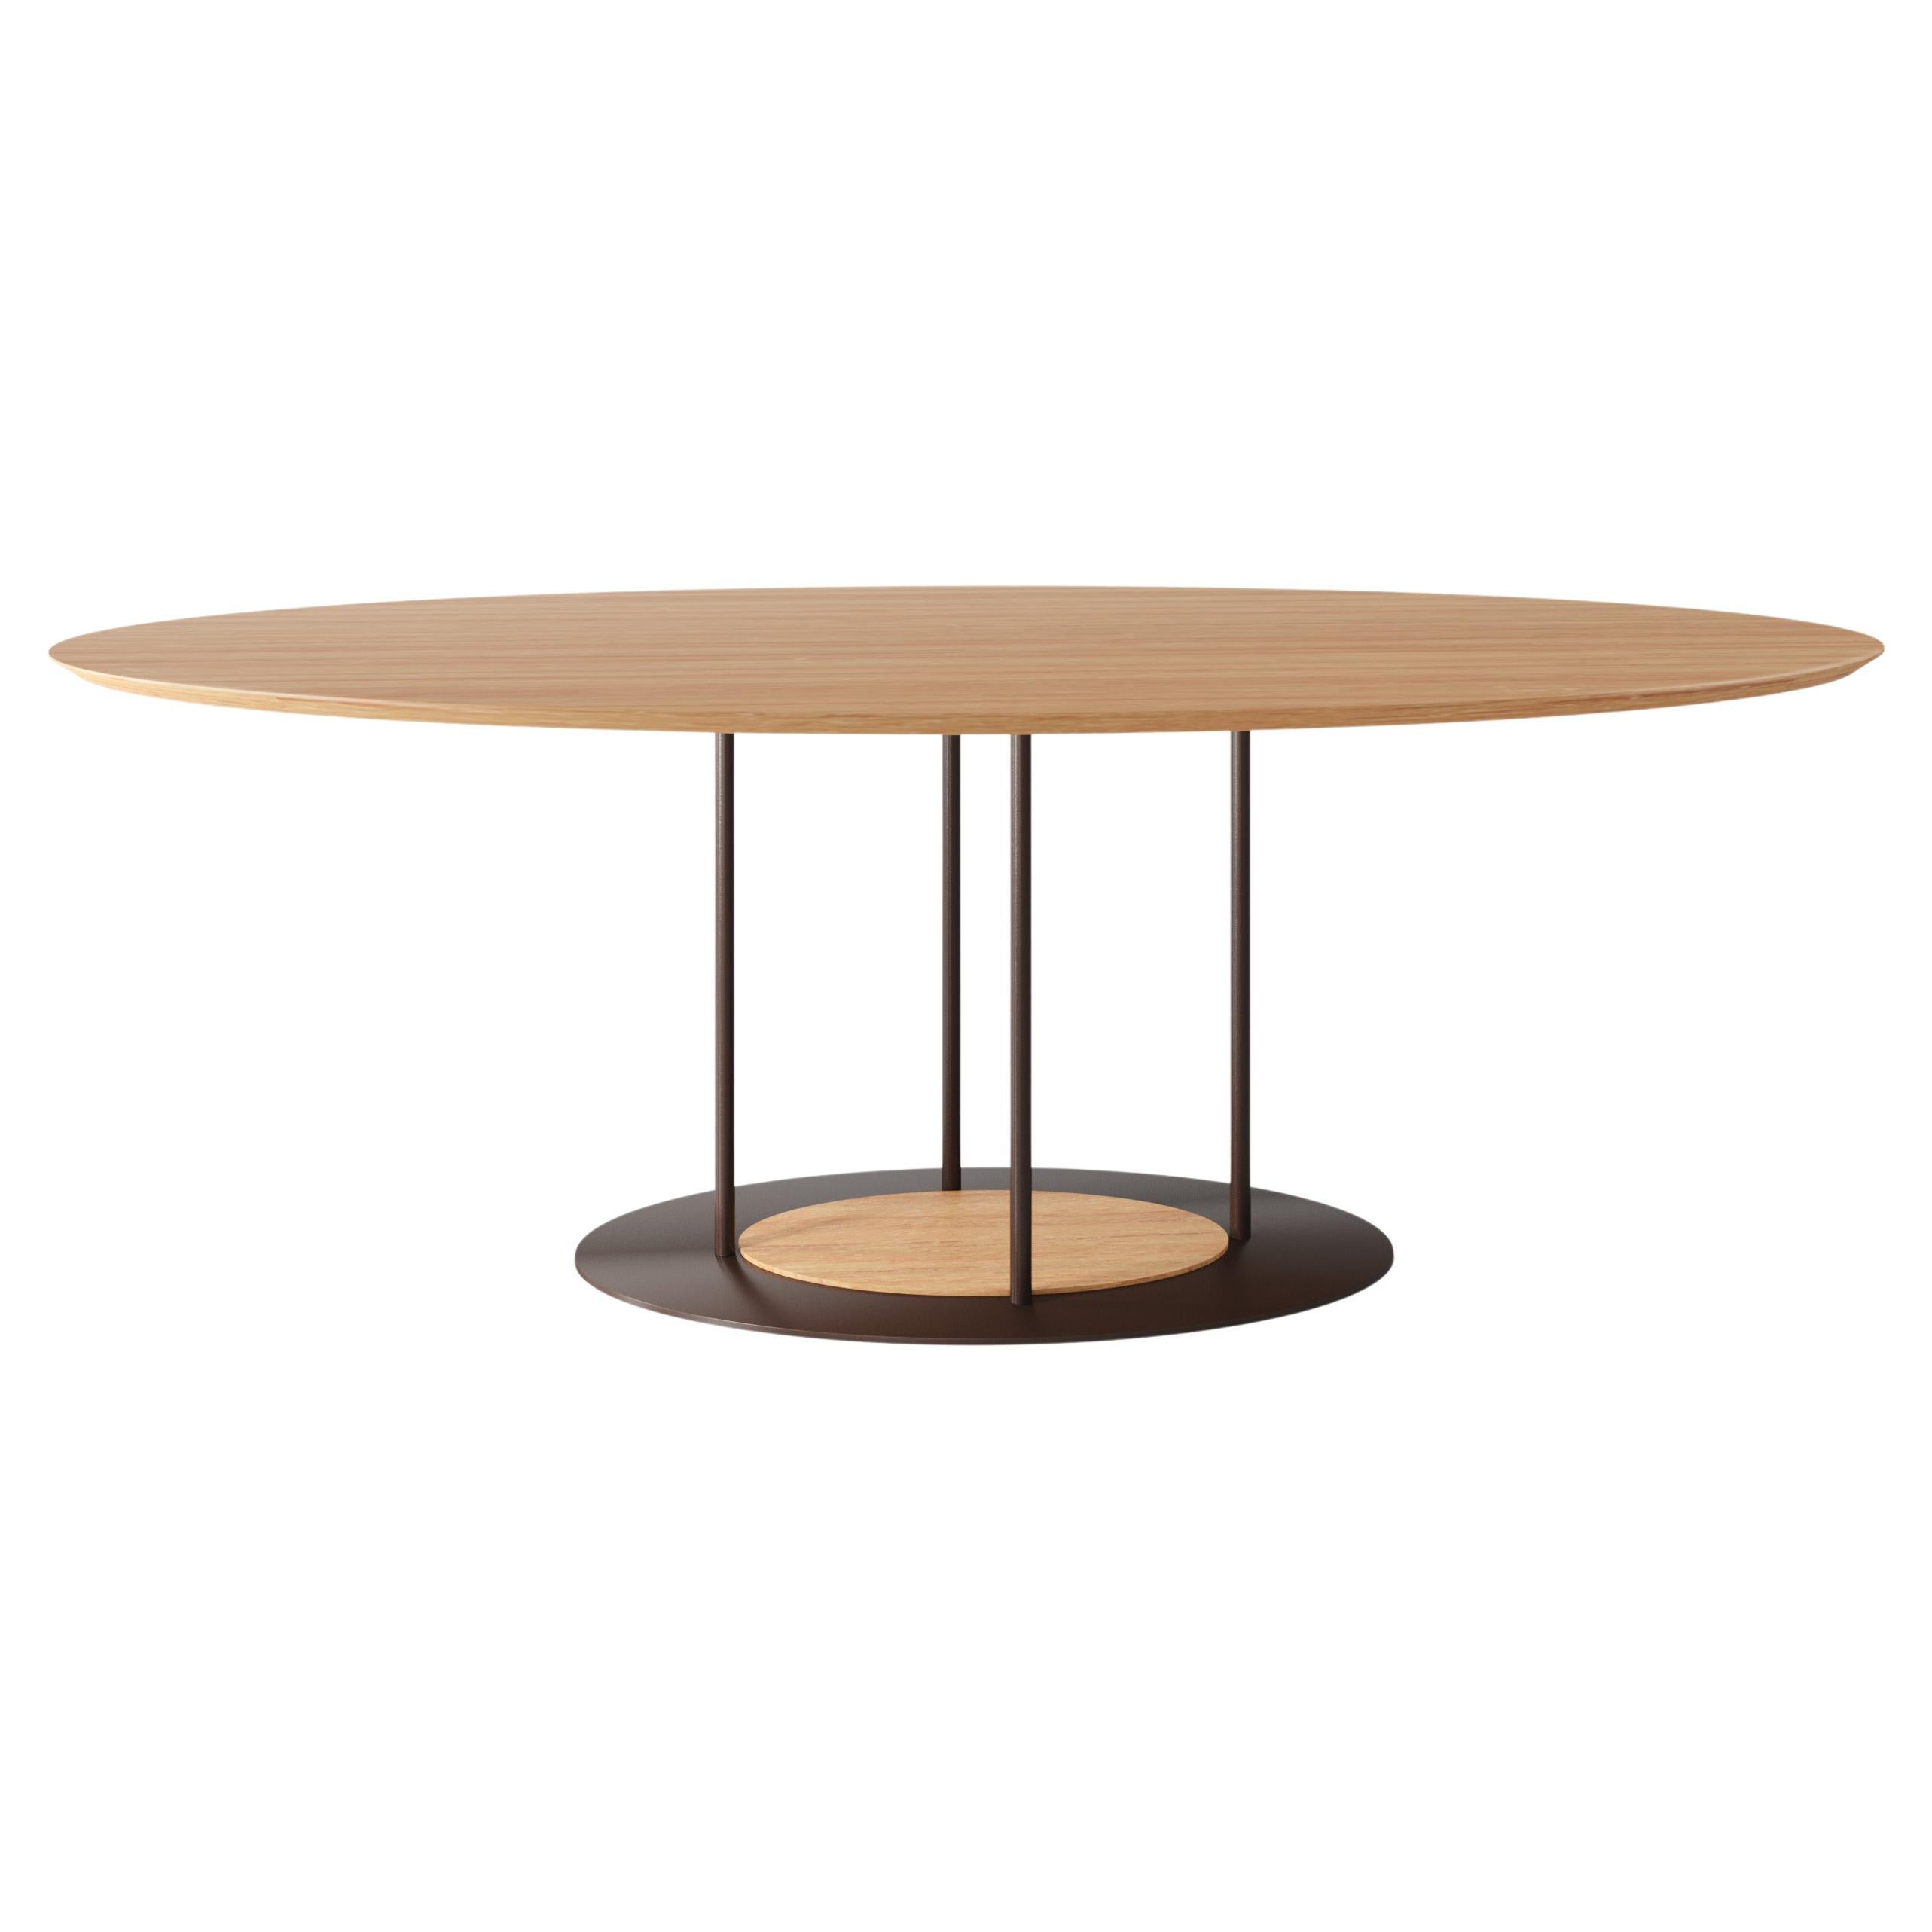 "Pilar" Oval Dining Table In Painted Steel and Natural Wood